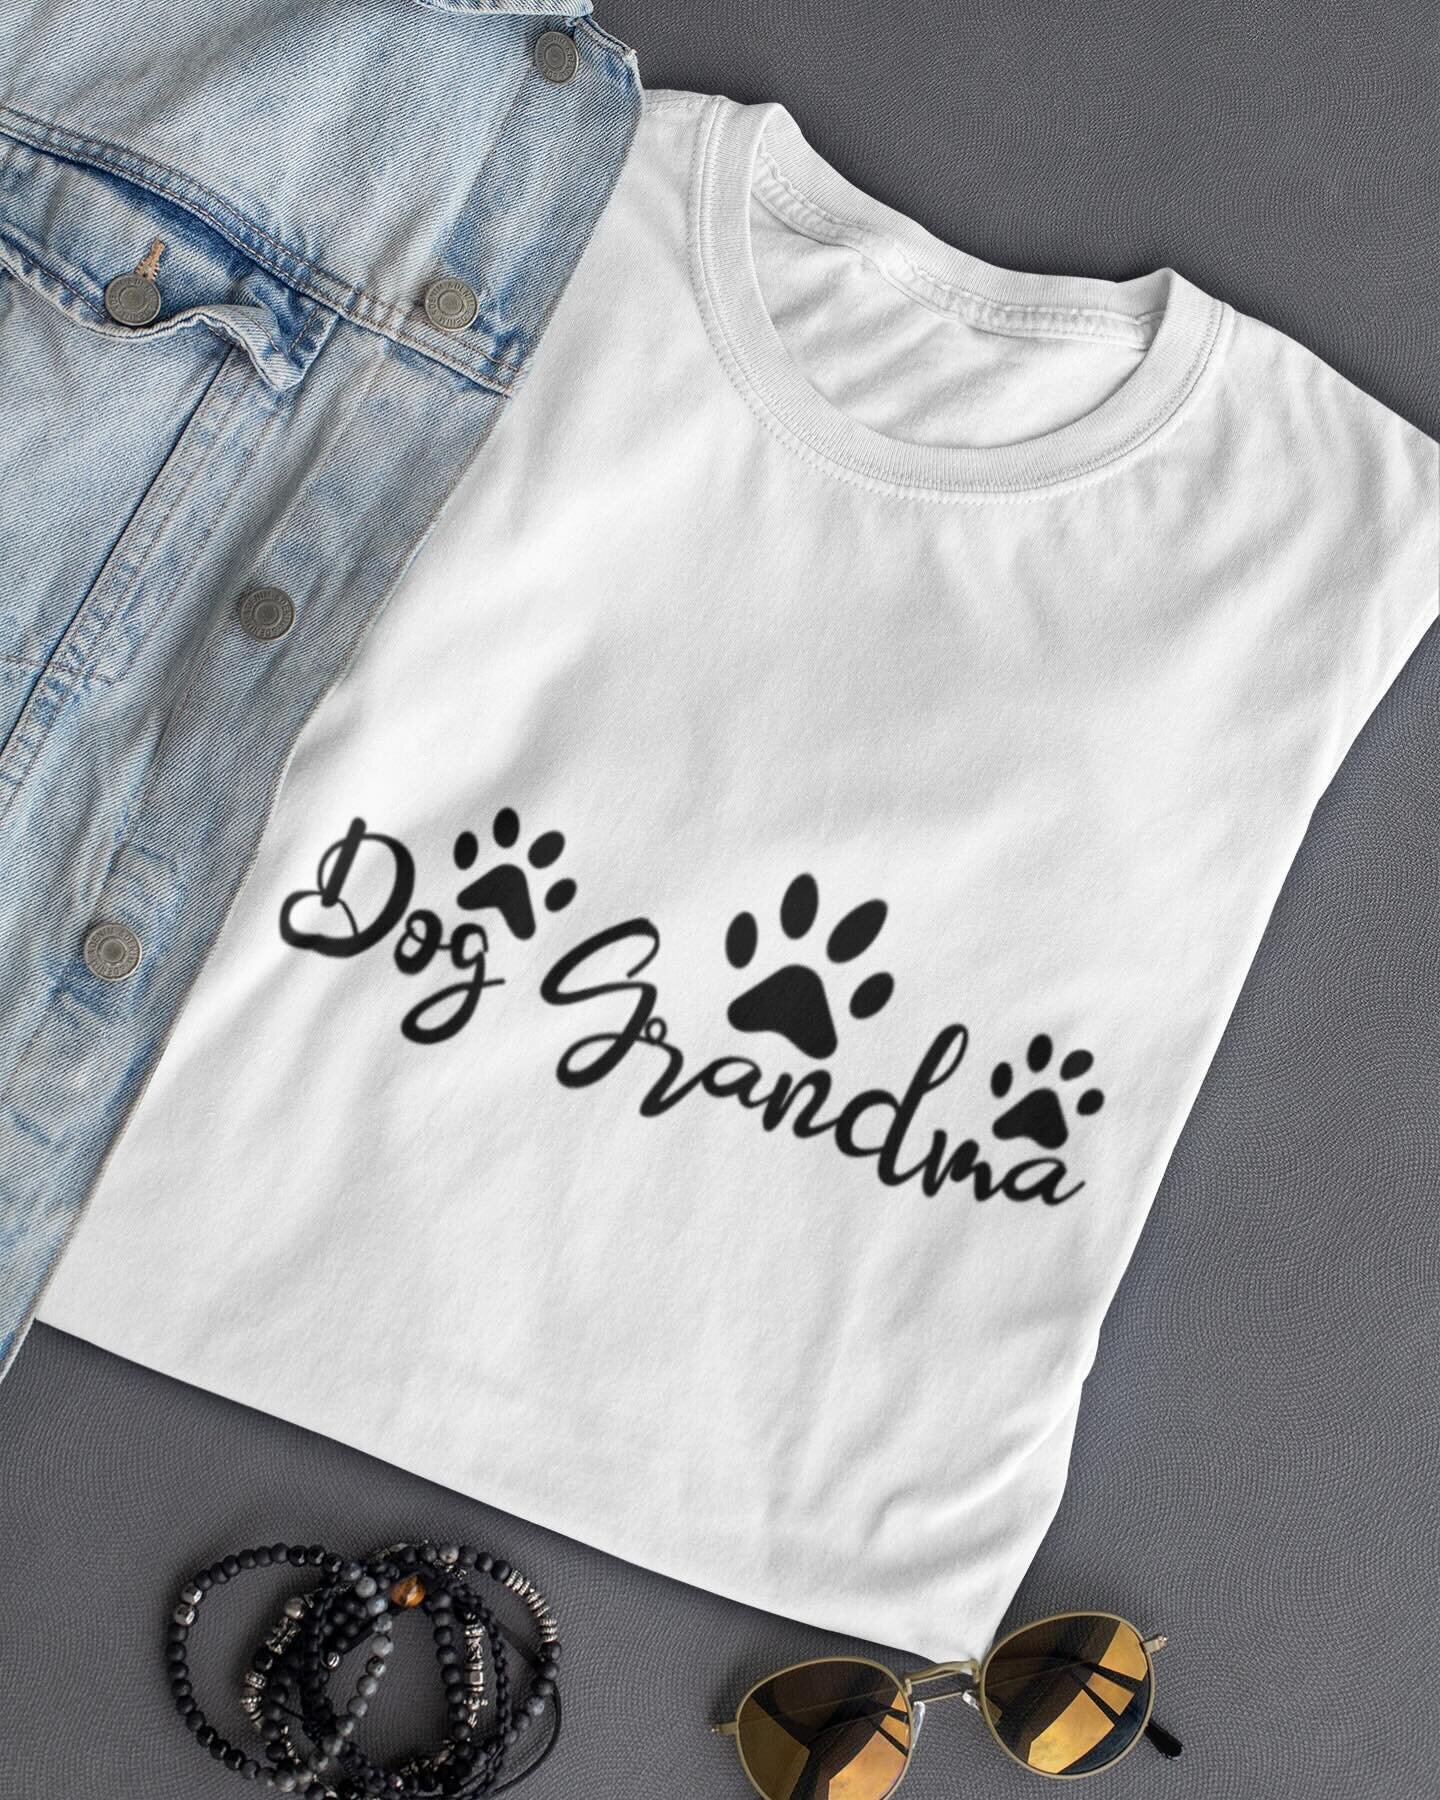 #celebrate all the #doglovers in your life! #linkinbio we #love our #gsp #babies and we&rsquo;re sure you love your babies too. Check out our #anytime and #mothersday #doglove #tshirts #hoodies and #sweatshirt options #instagood #smallbusiness #insta